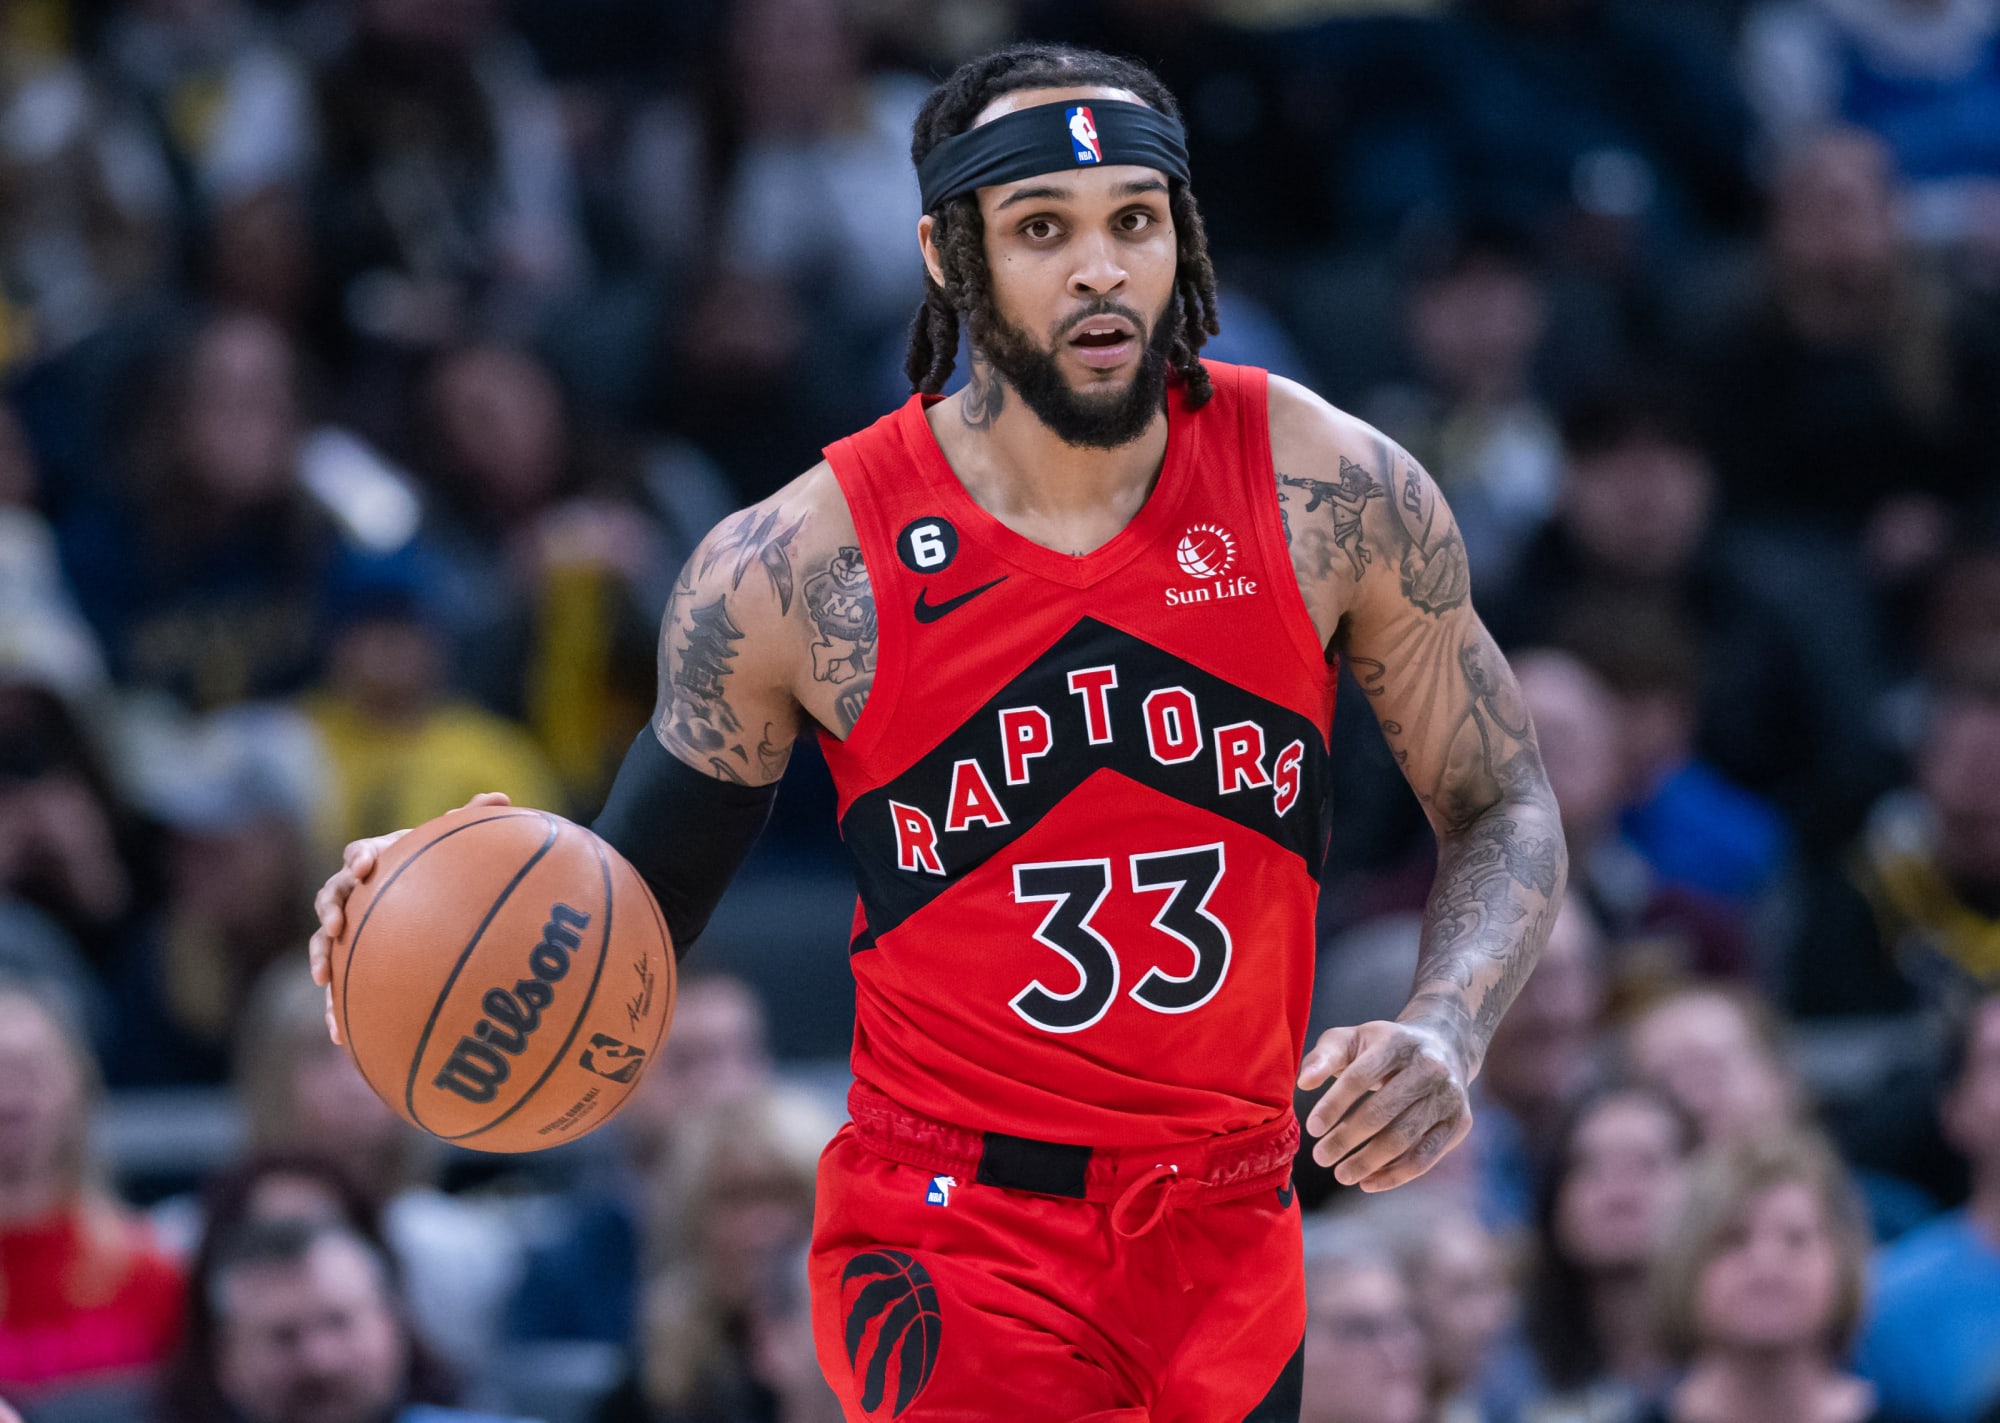 Raptors trade rumors 5 teams who could acquire Gary Trent Jr.